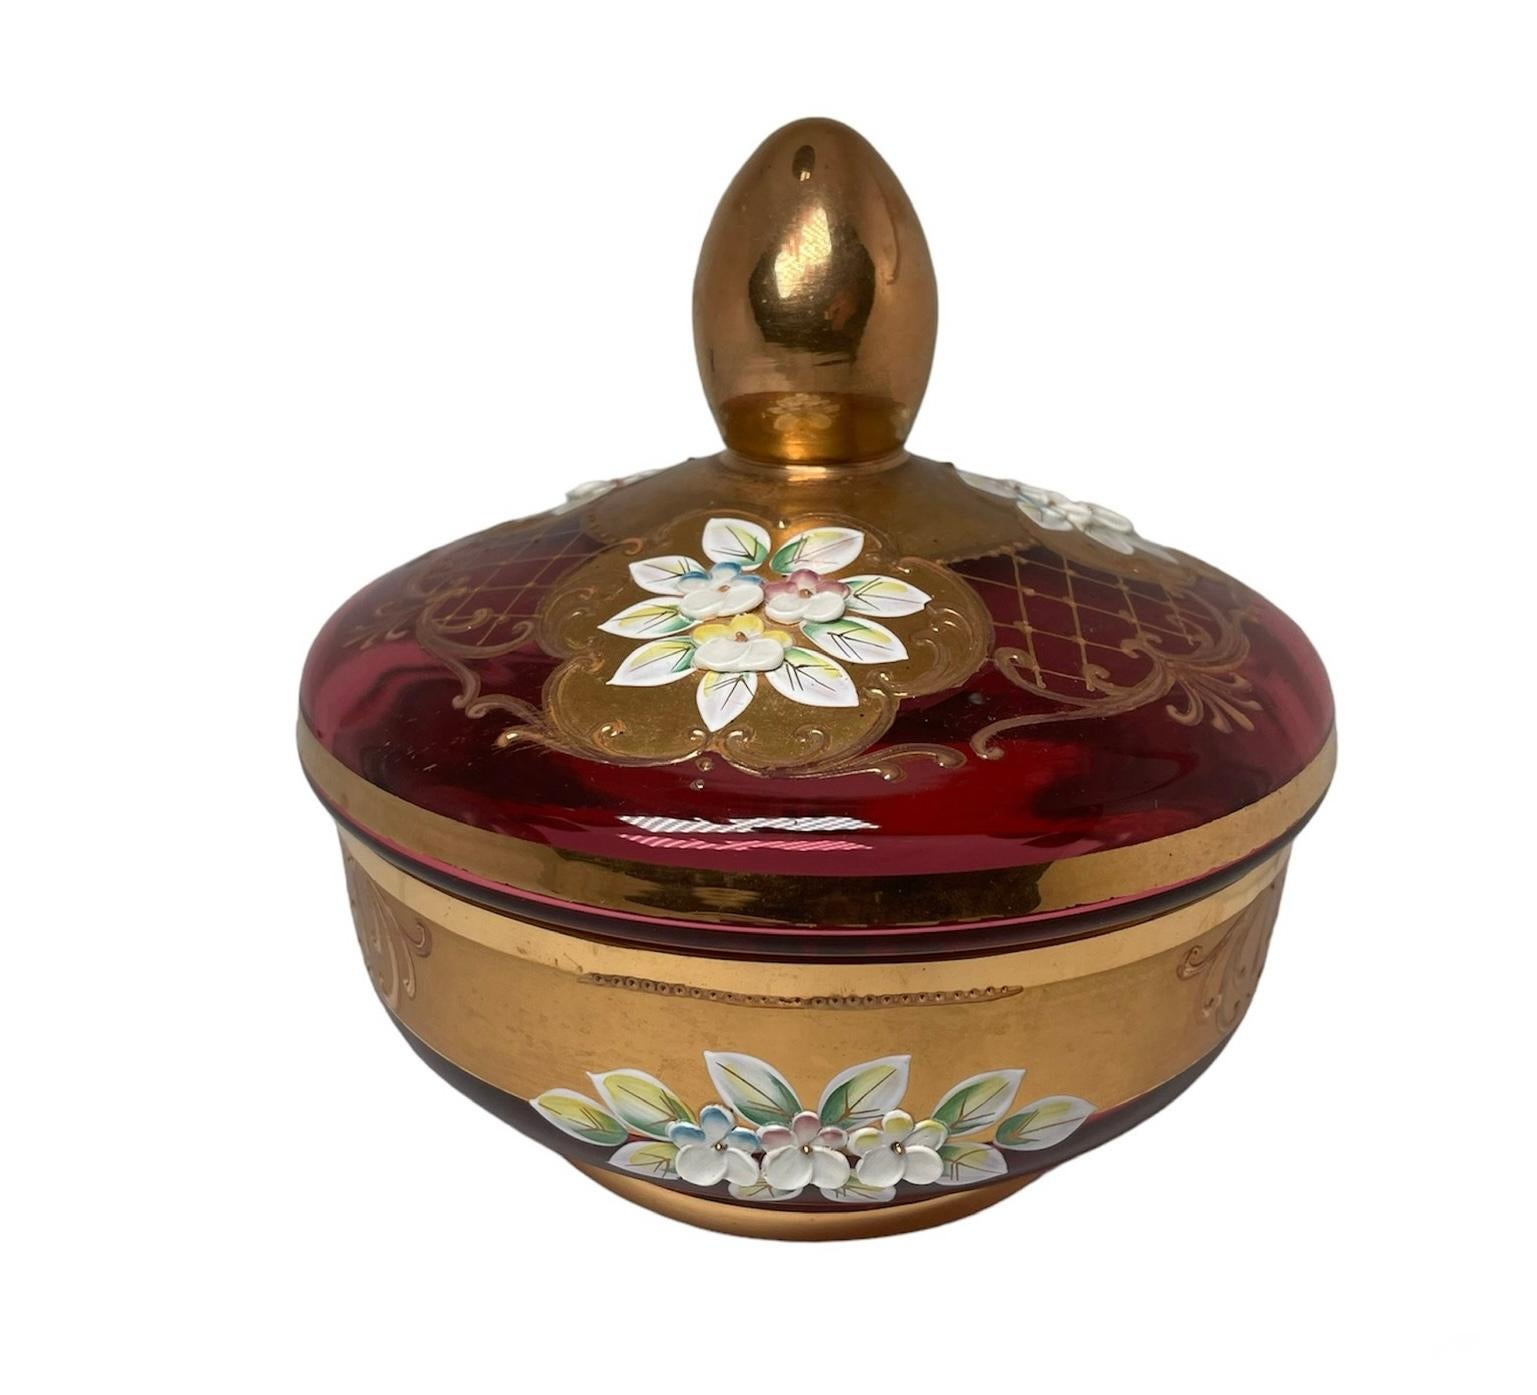 This is a Czech Bohemian Glass Candy Jar. It depicts a light cranberry color lidded Candy Jar decorated with bouquets of hand painted enamel Forget Me Not flowers. Gold and gilt scrolls enhanced the decor of the glass.